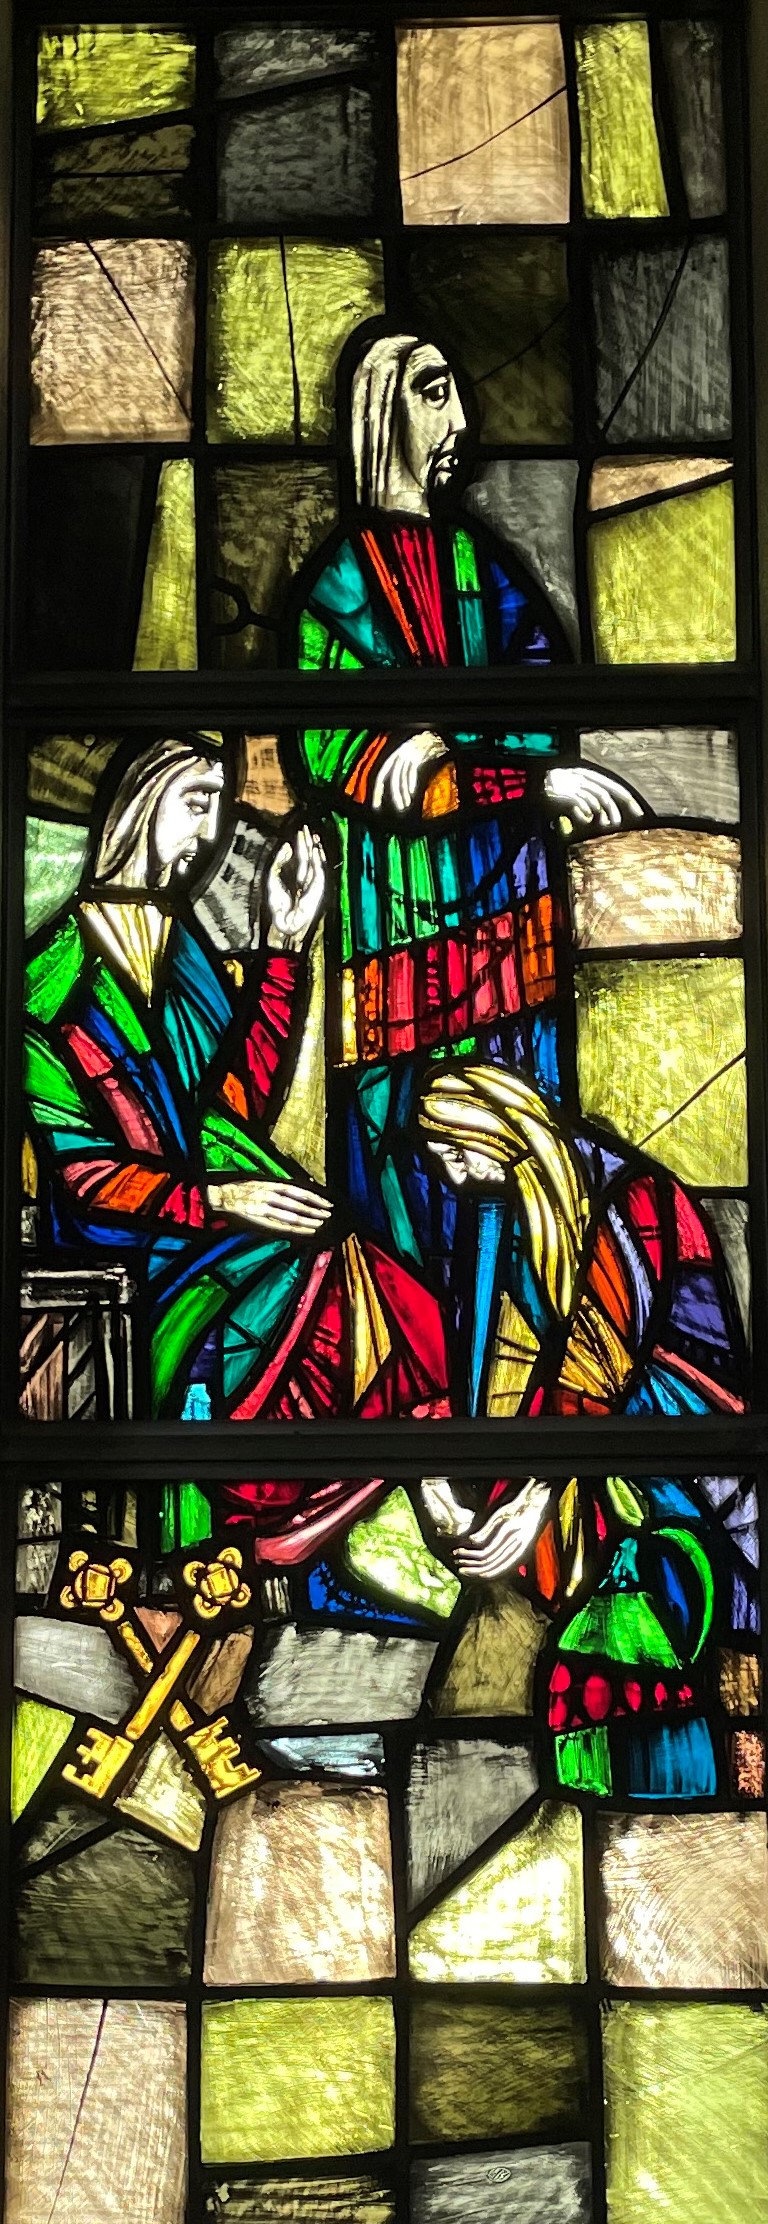 Picture of stained glass window showing a woman washing Jesus' feet